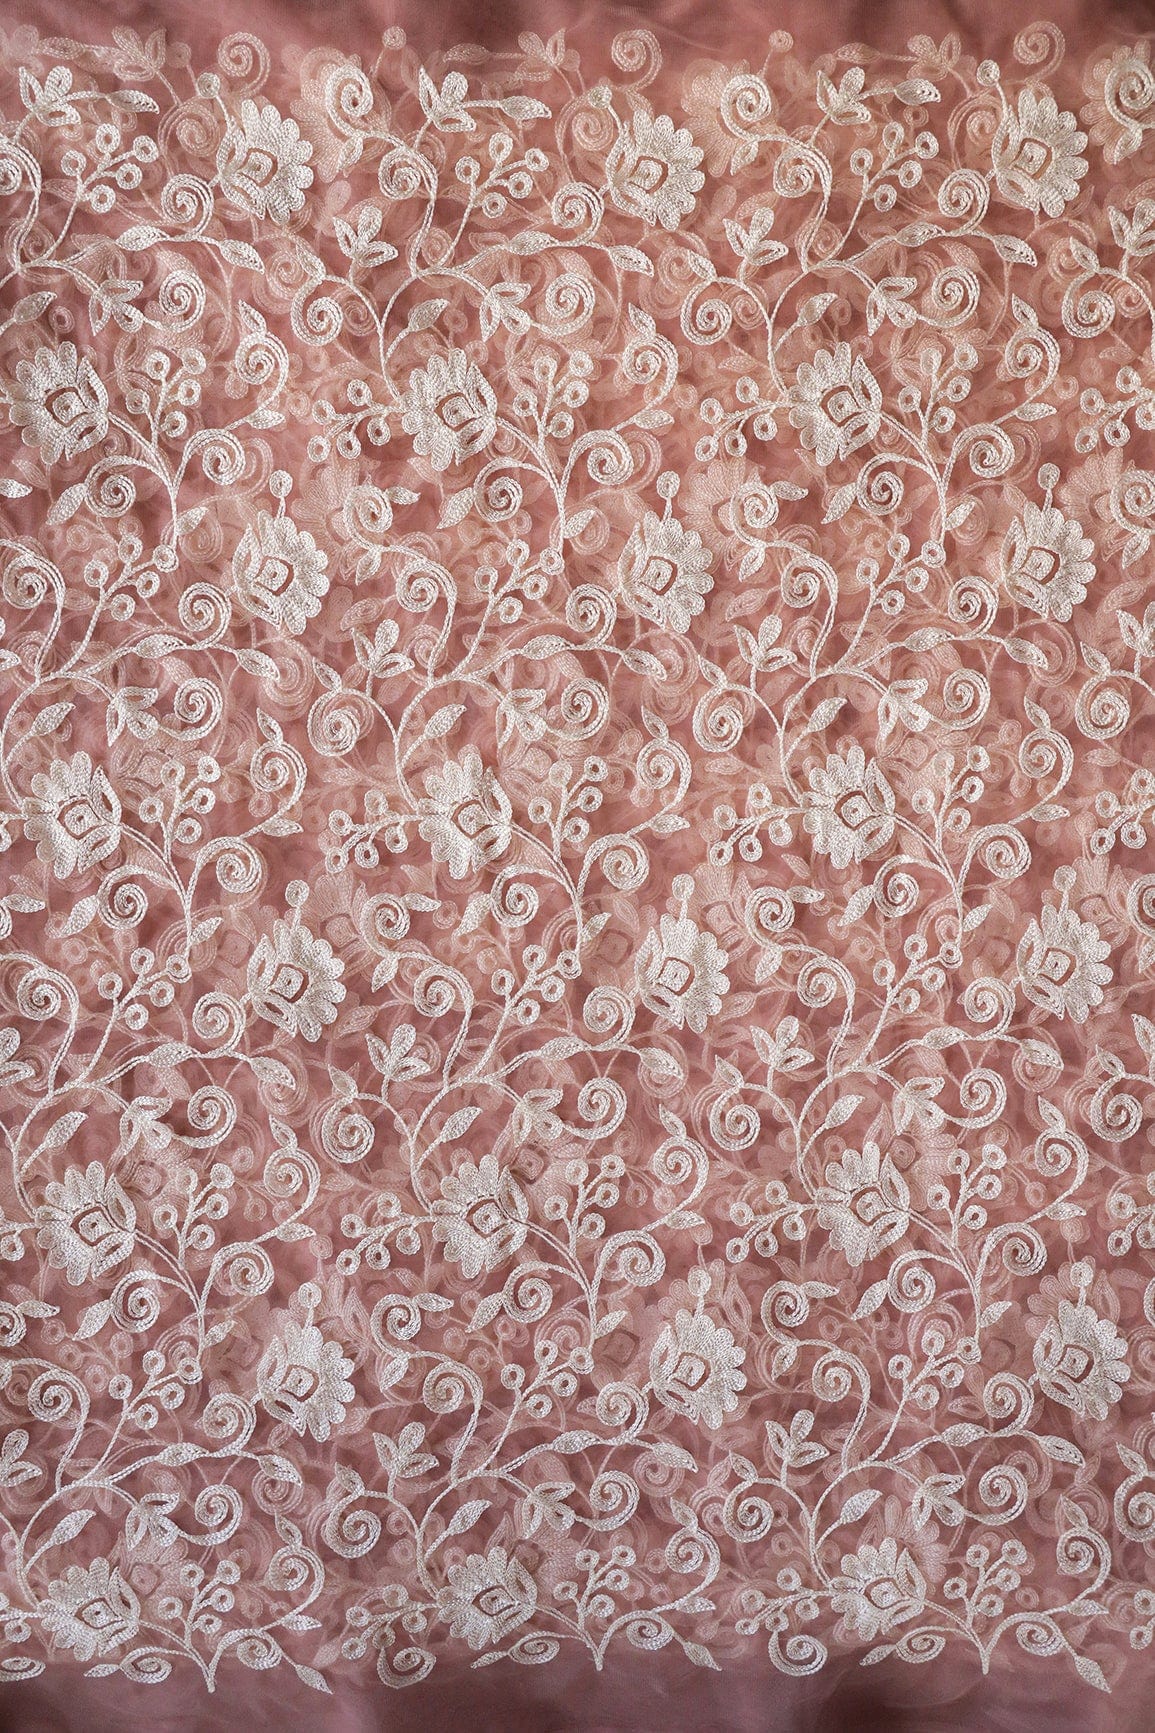 doeraa Embroidery Fabrics White Thread Beautiful Heavy Floral Embroidery On Dusty Pink Soft Net Fabric